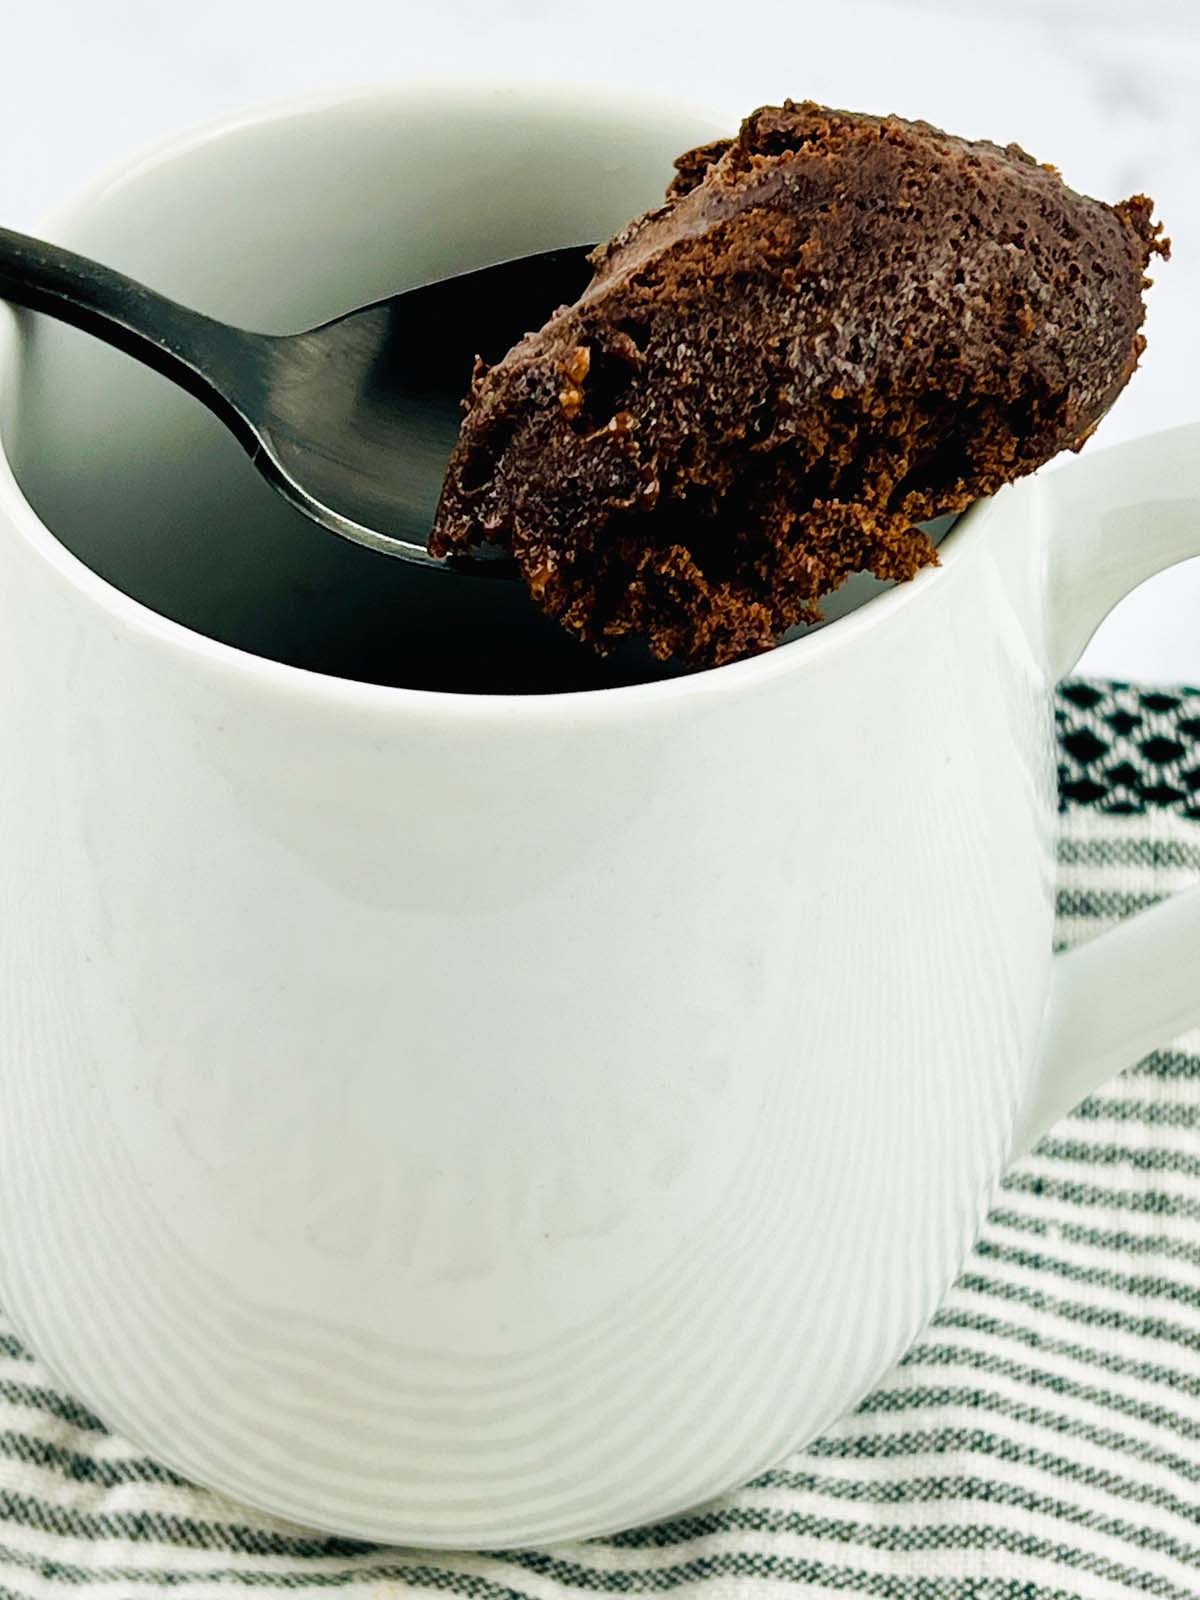 A scoop of cake on a spoon resting on a mug.